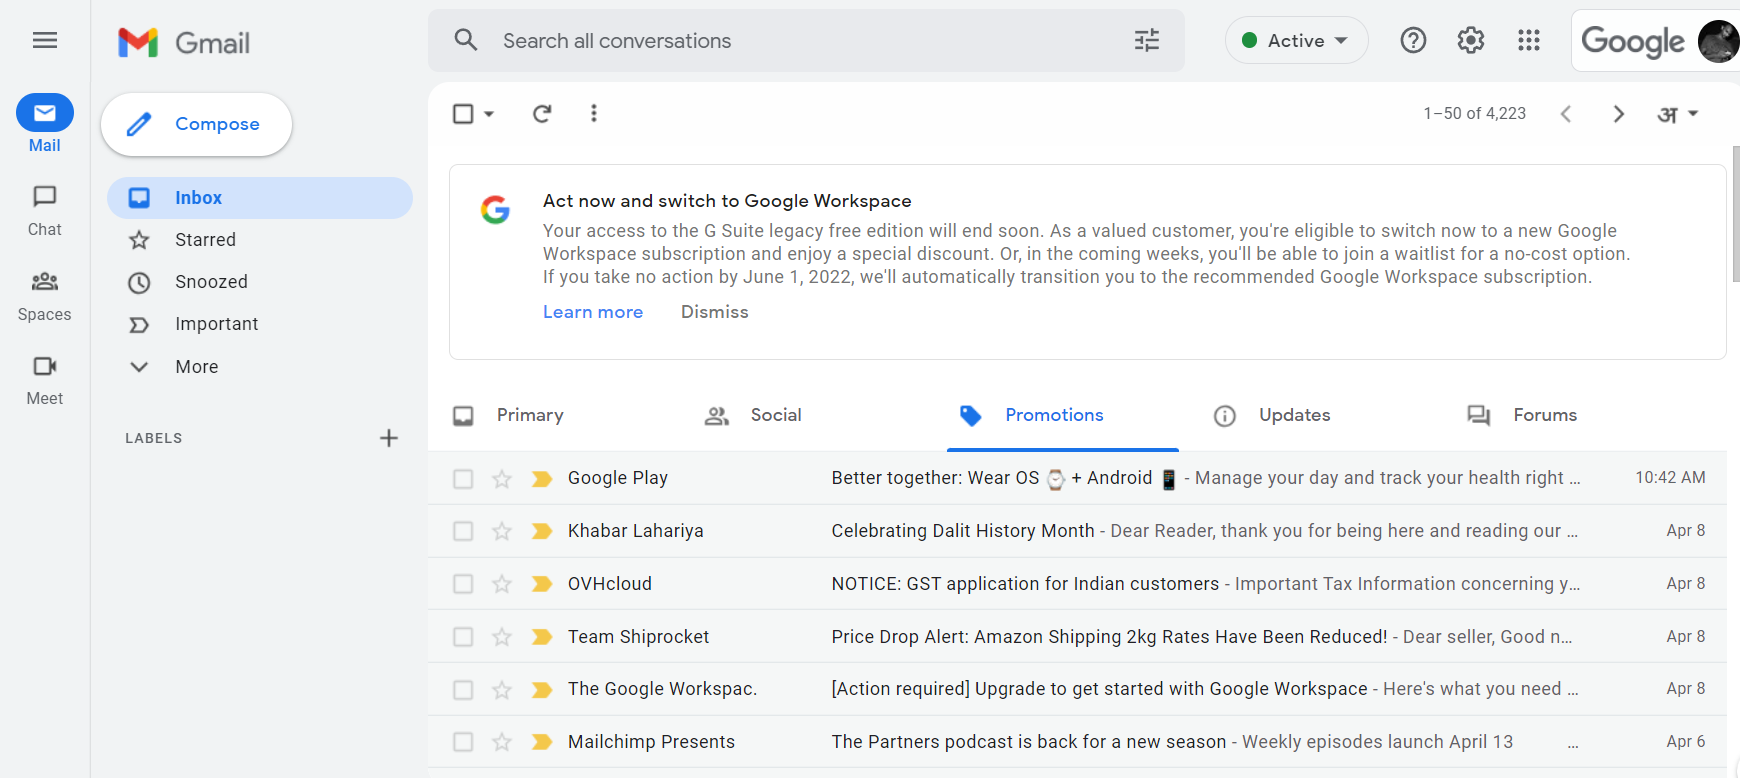 No more G Suite legacy free edition